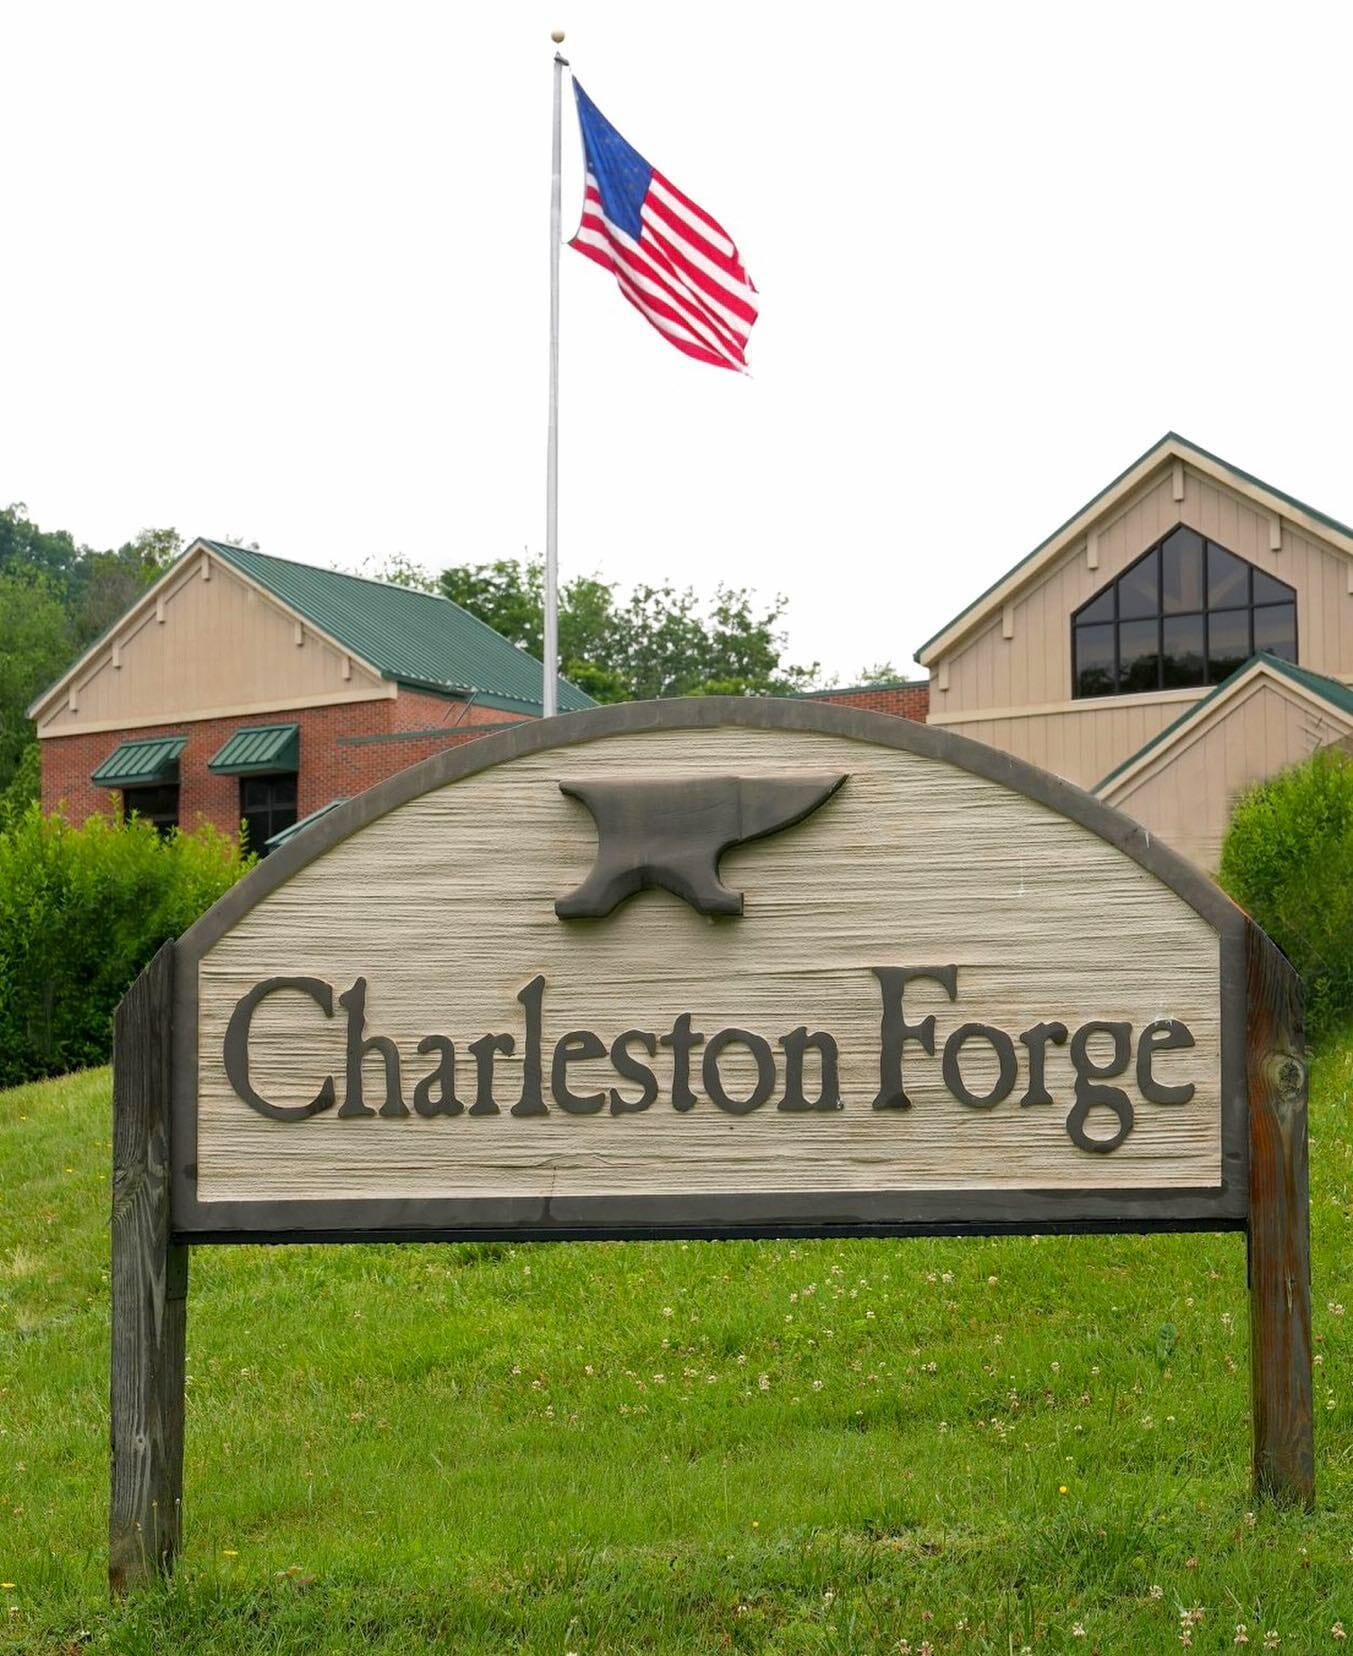 The American flag flies outside of the Charleston Forge Headquarters, located in the heart of the Blue Ridge Mountains.